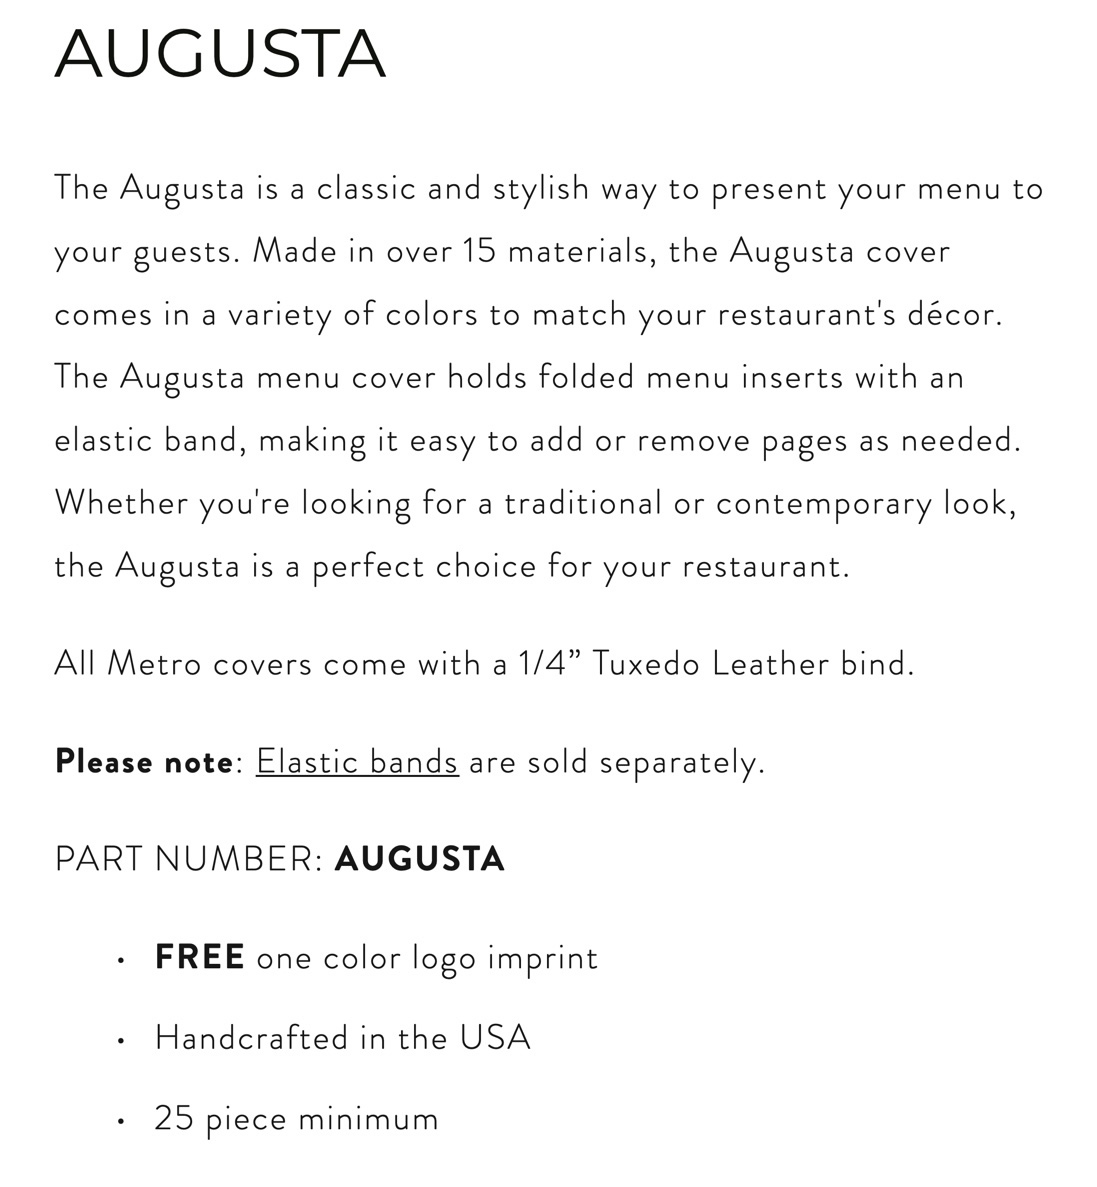 Augusta Menu Covers Generalized Description of many related products.